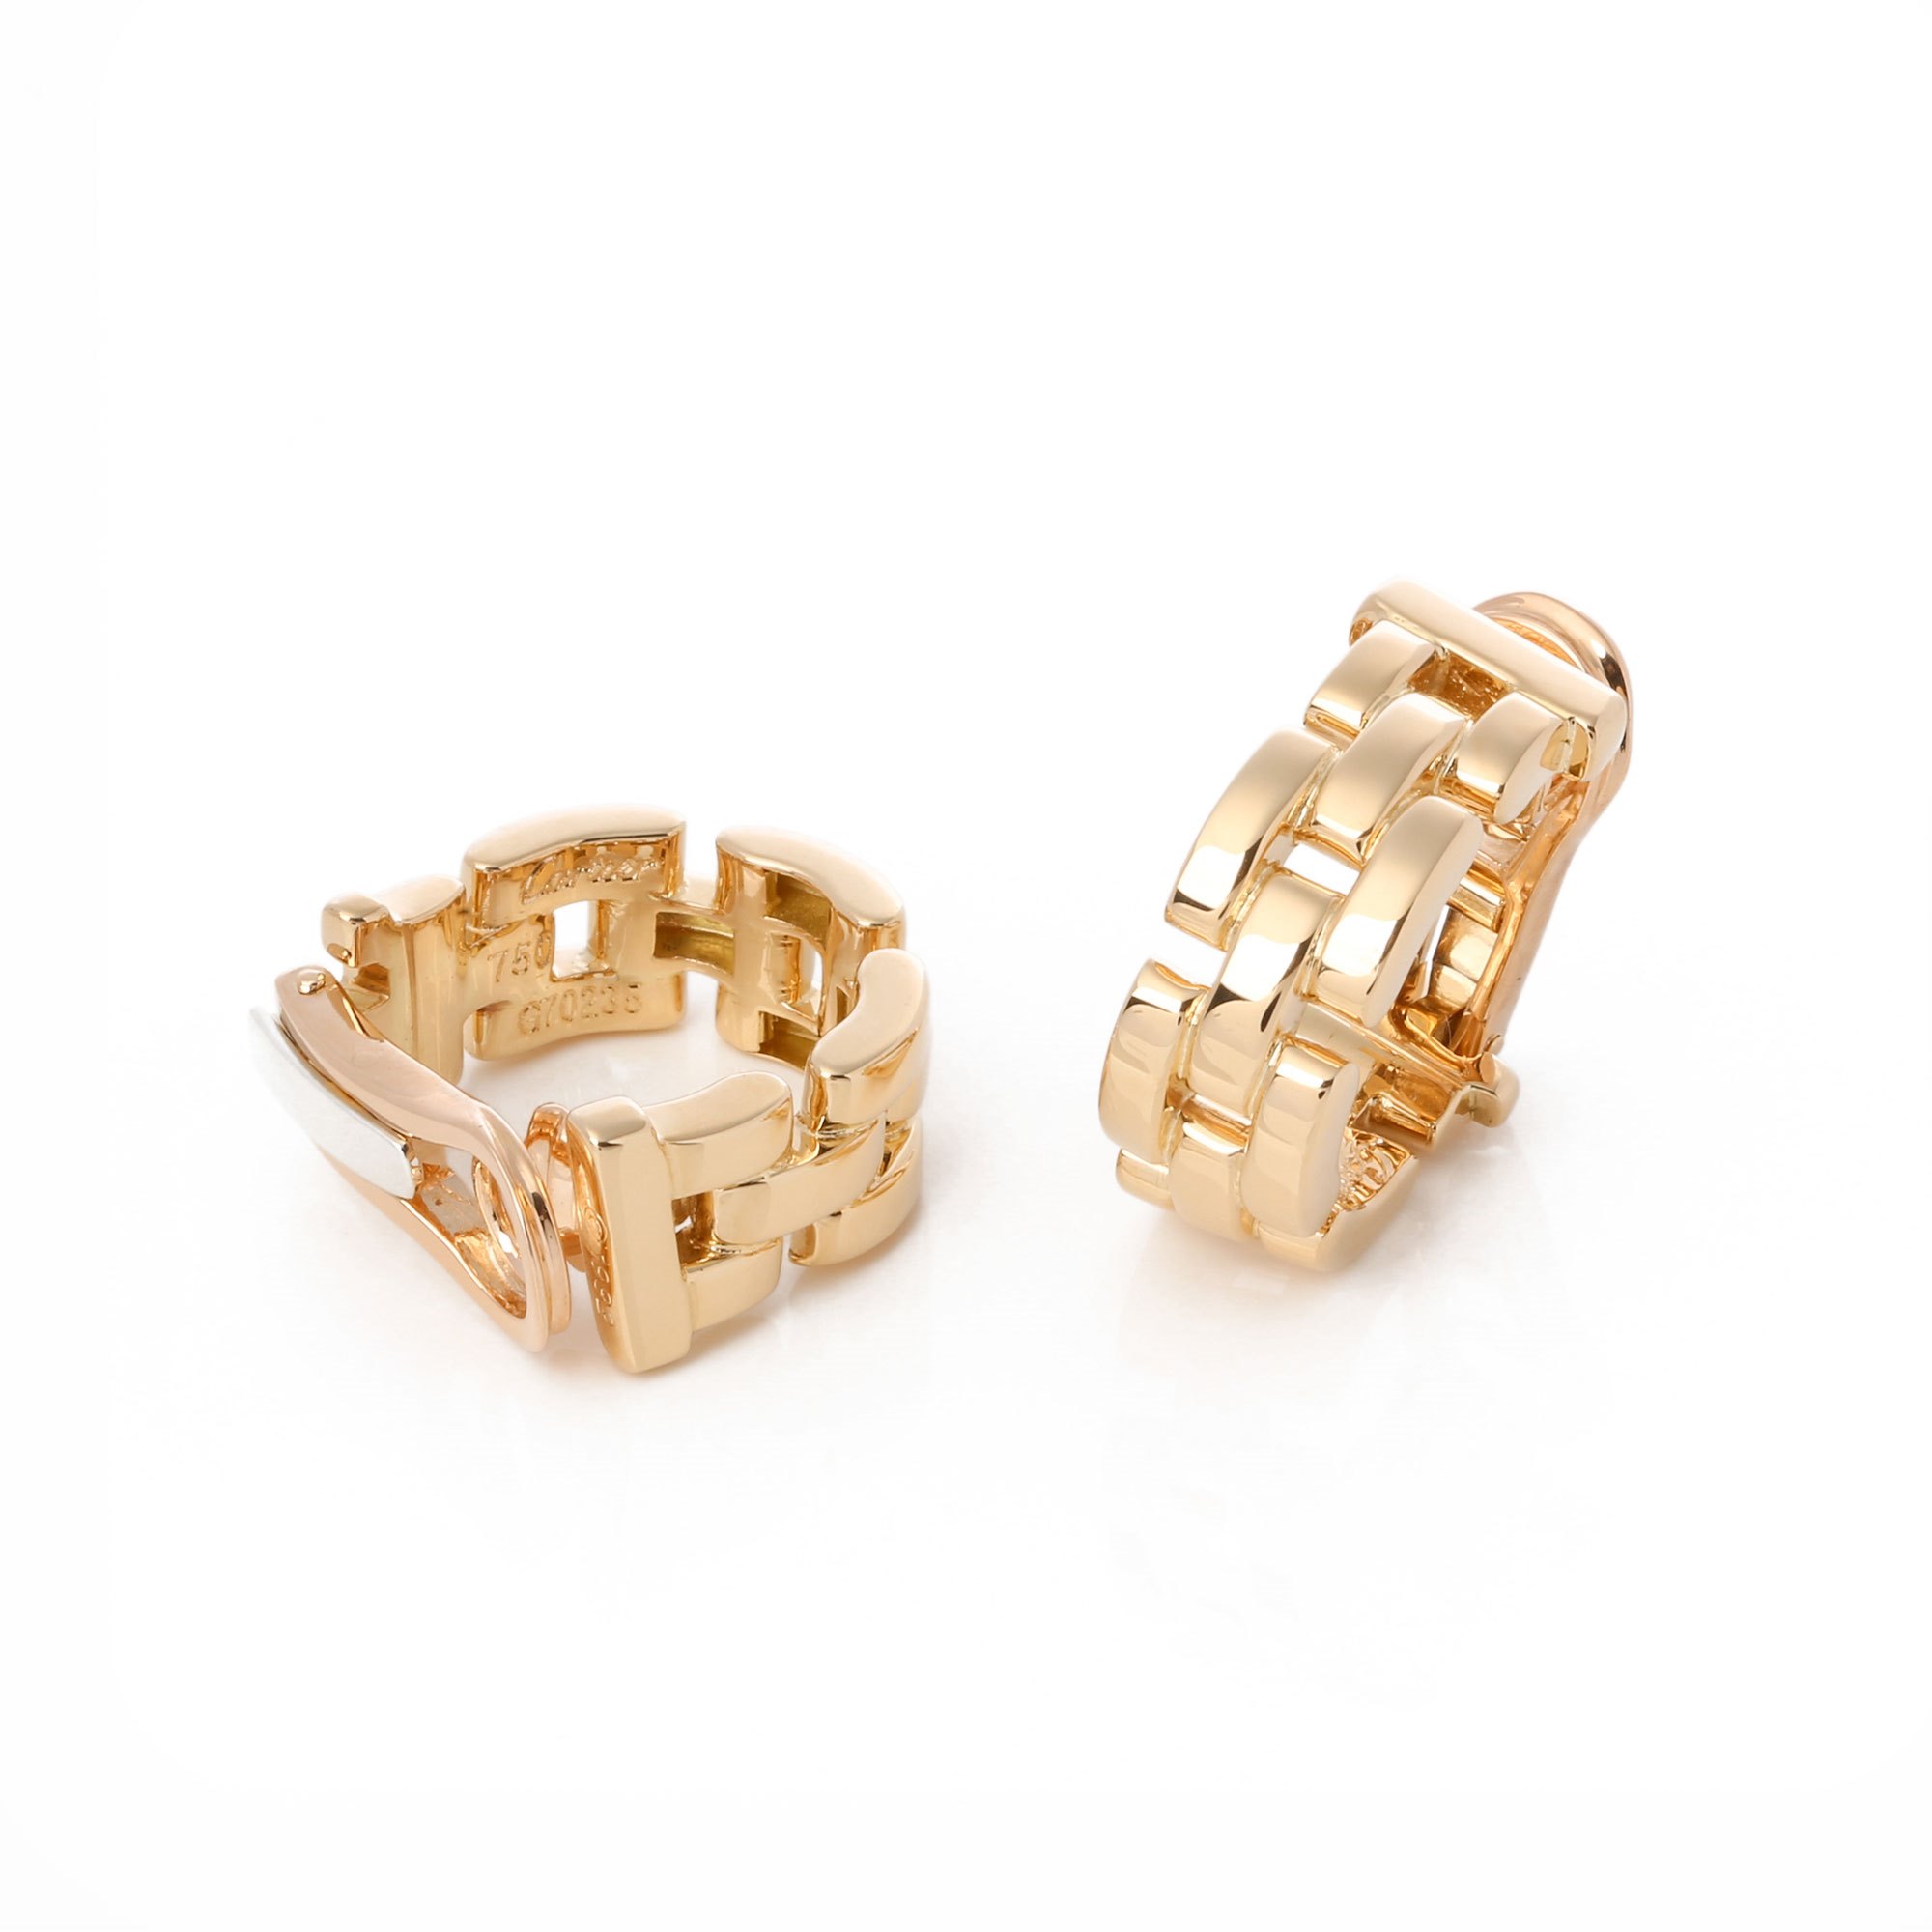 Cartier Maillon Panthere Earrings